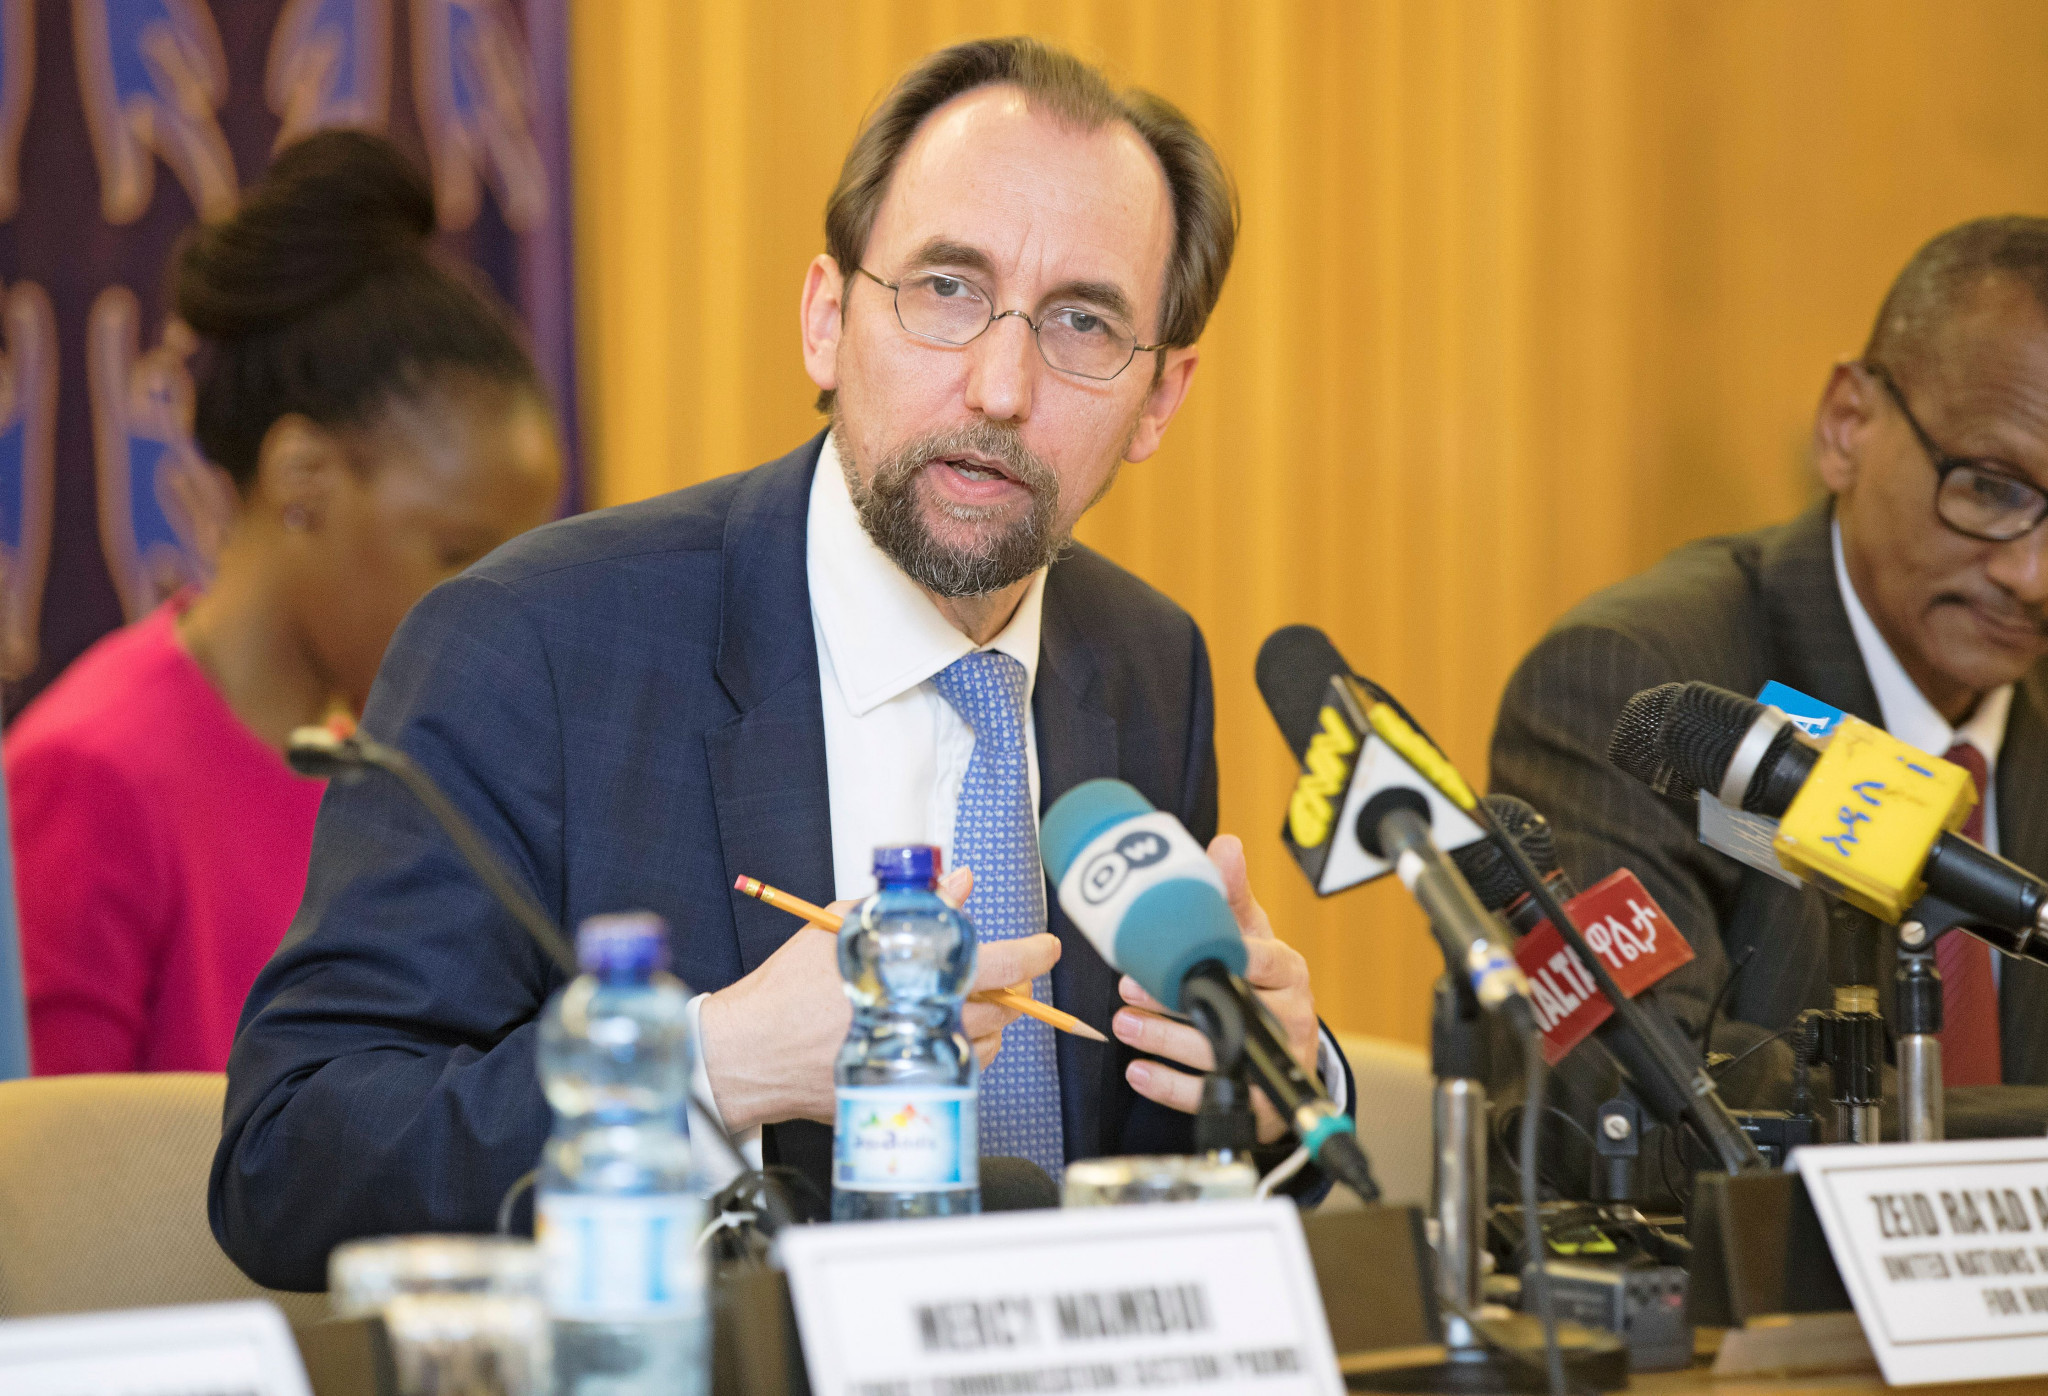 Prince Zeid Ra’ad Al Hussein has opted not to continue as chair of the IOC Advisory Committee on Human Rights ©Getty Images